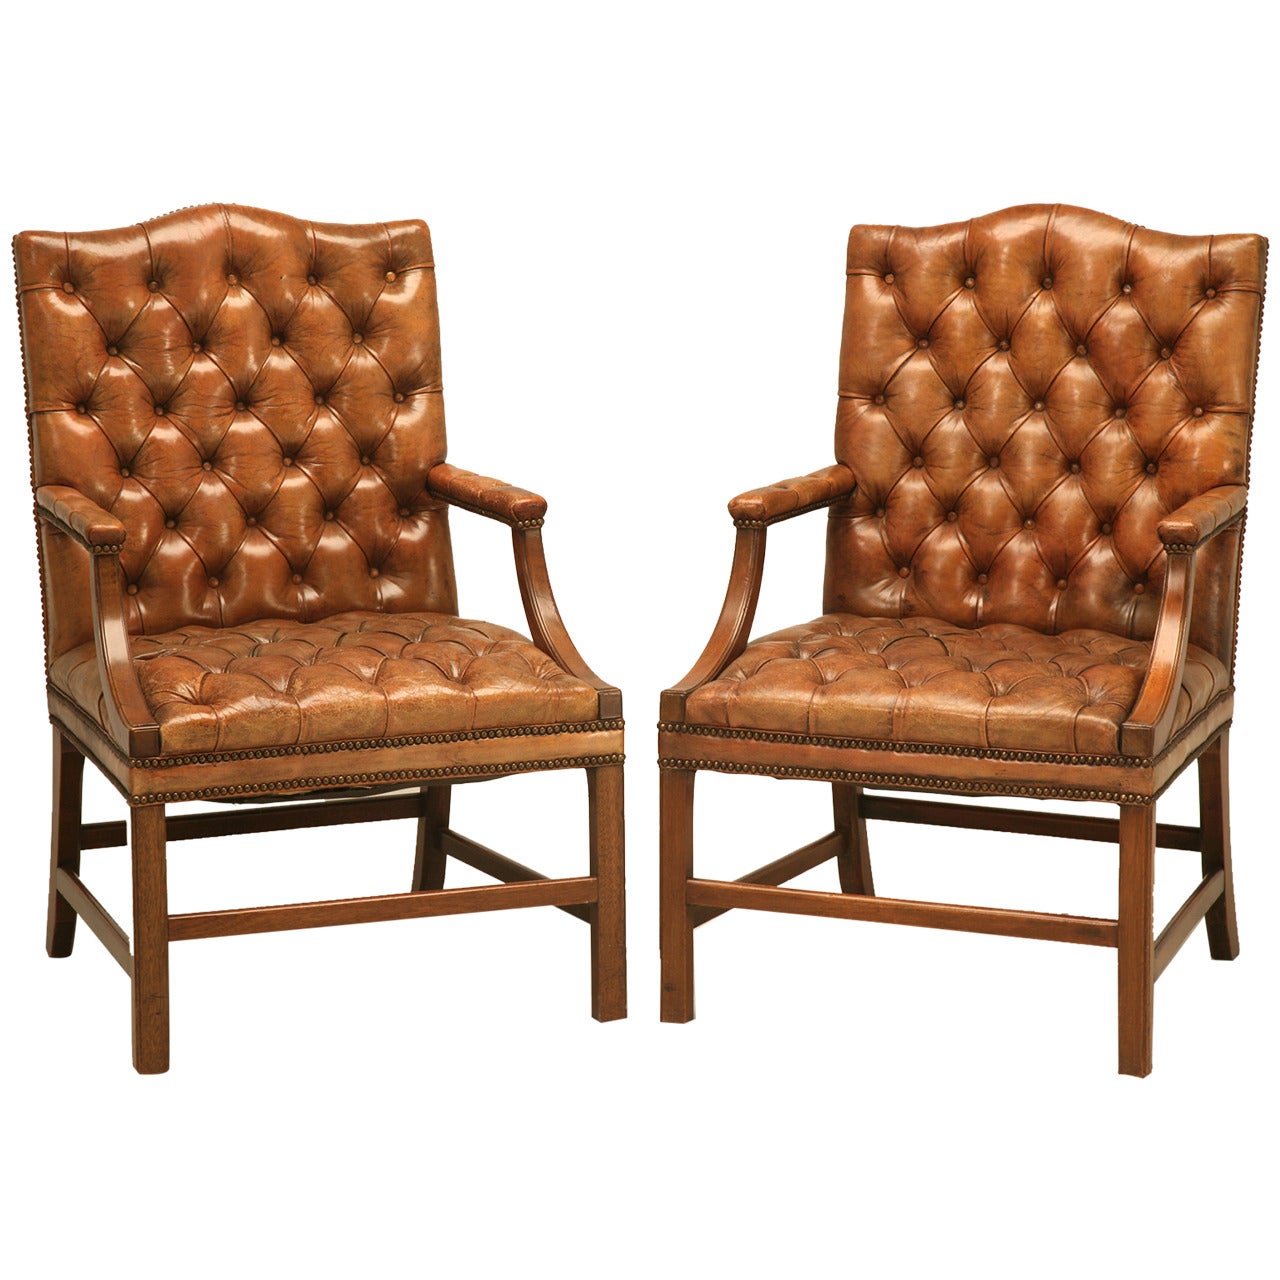 Pair of English Button Tufted Leather Vintage Chesterfield Armchairs